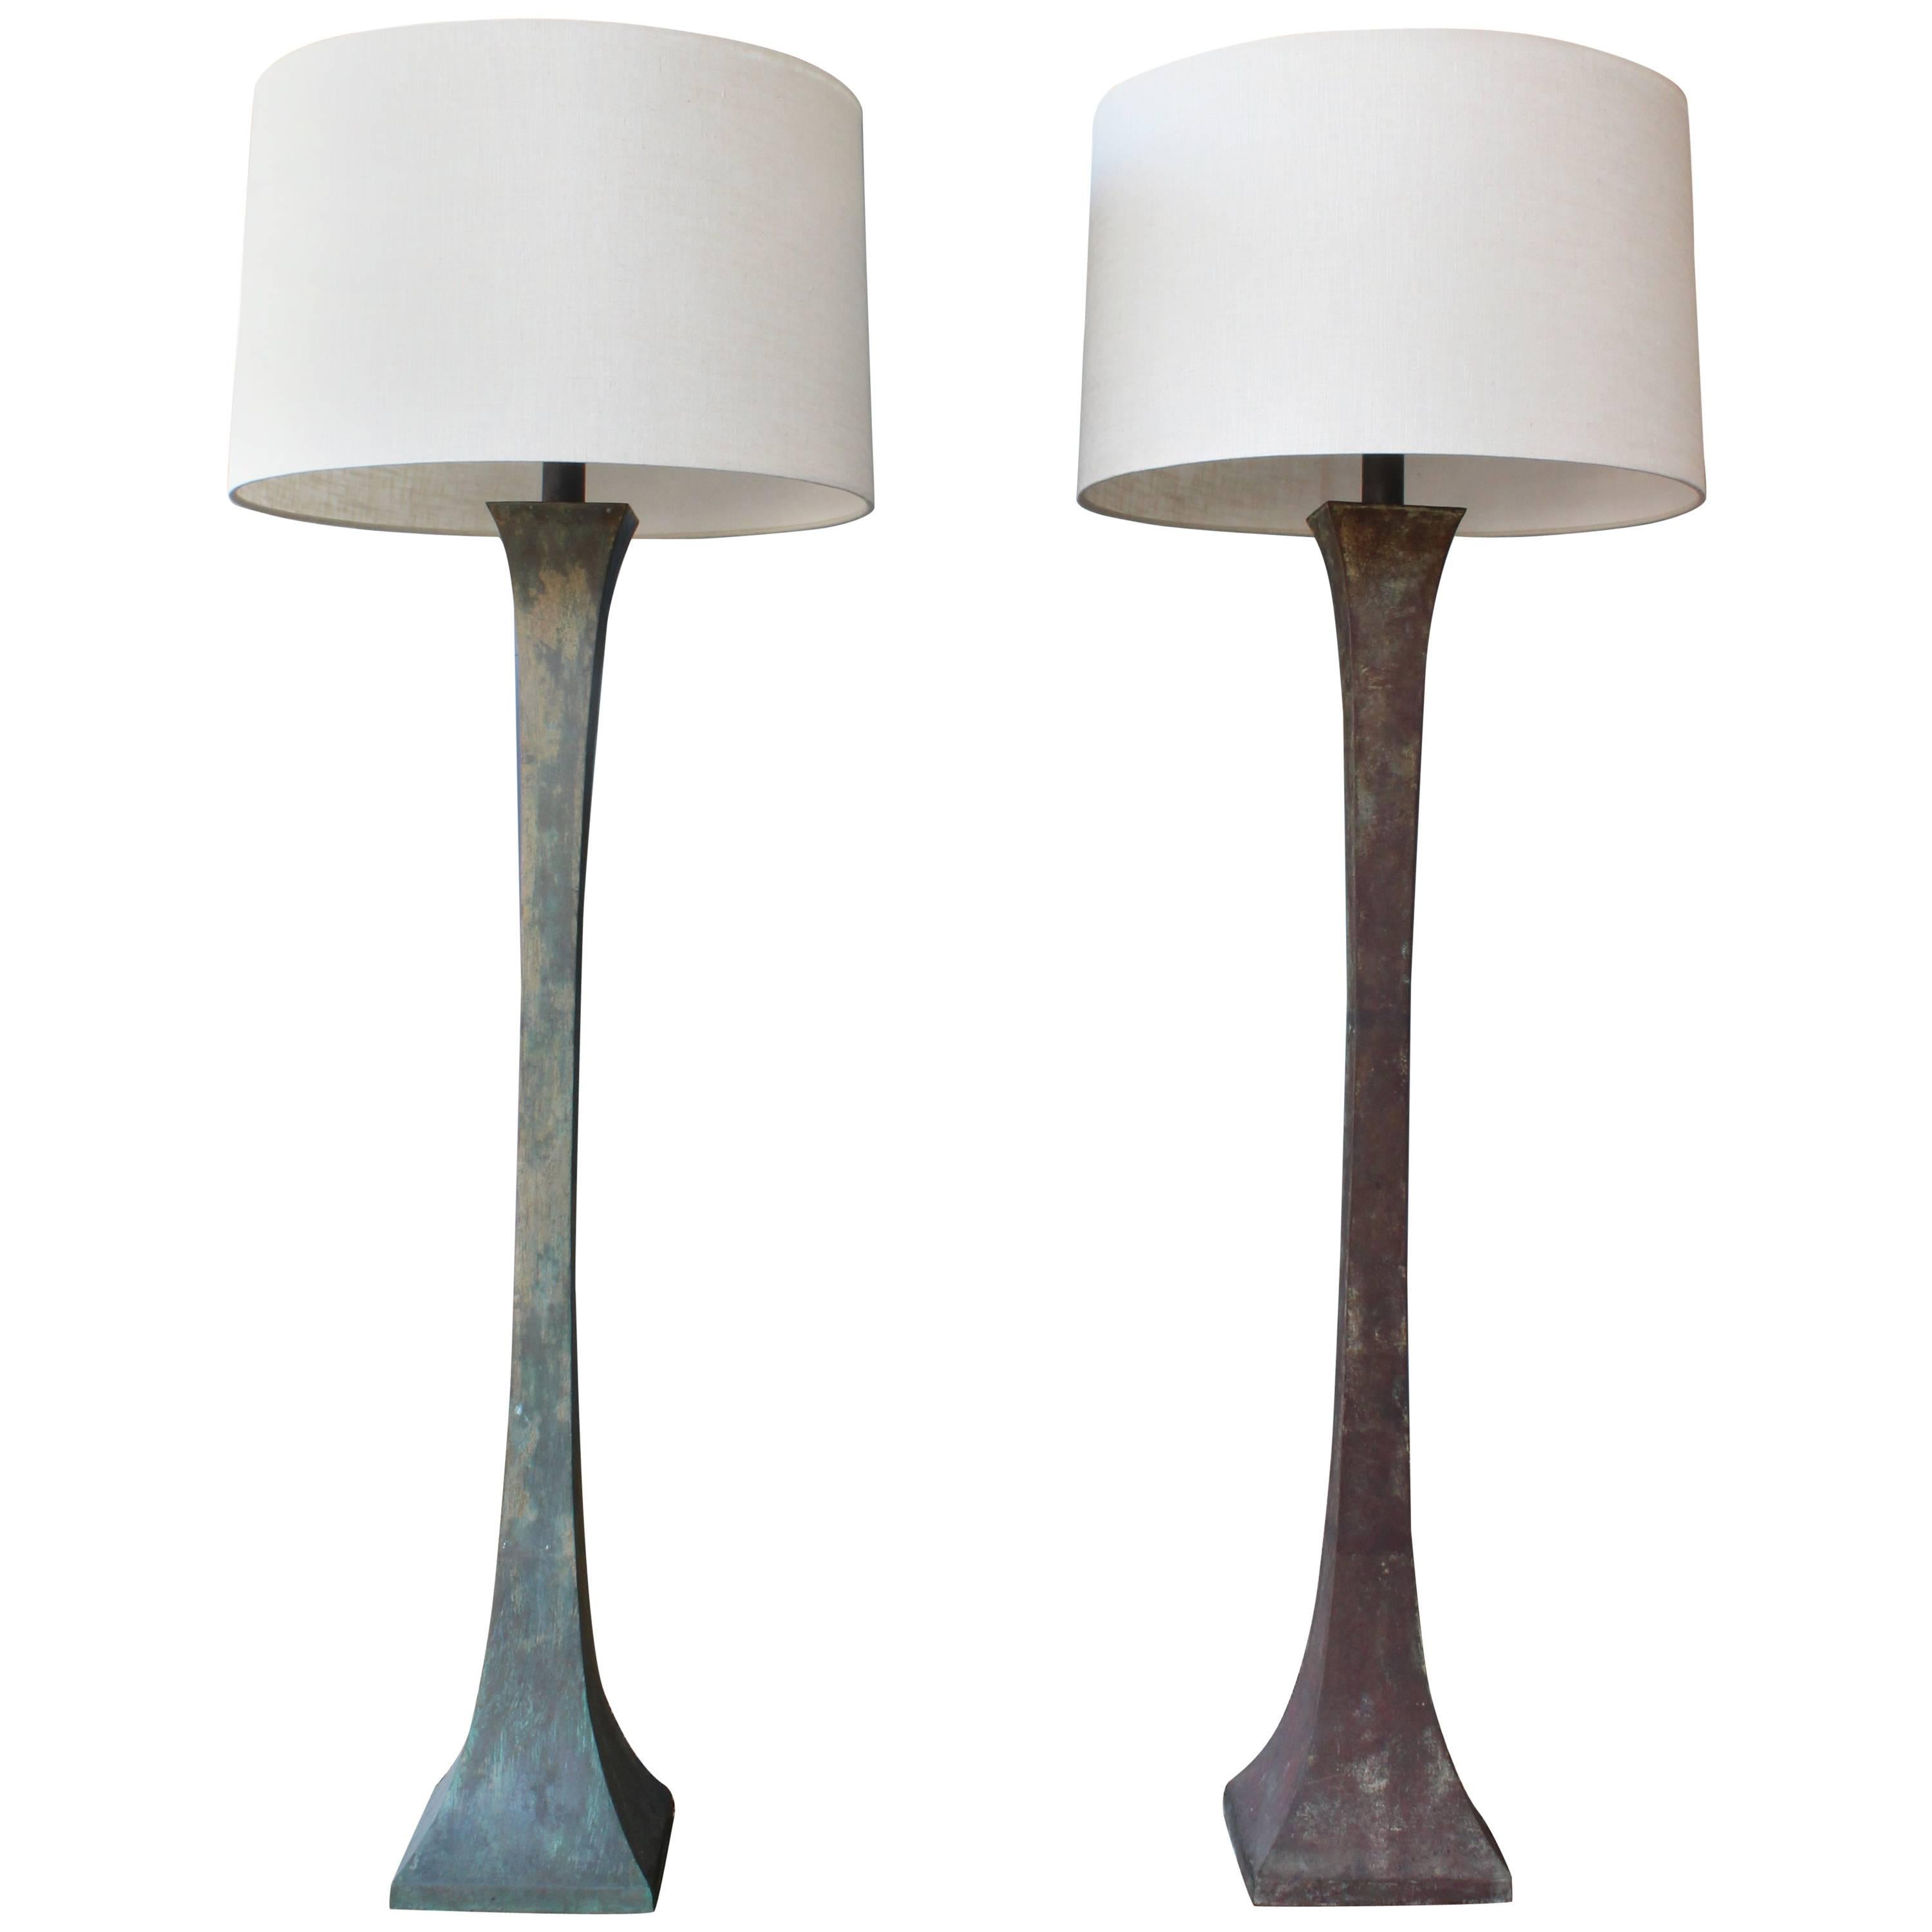 Pair of 1960s Metal Floor Lamps with Heavy Patina